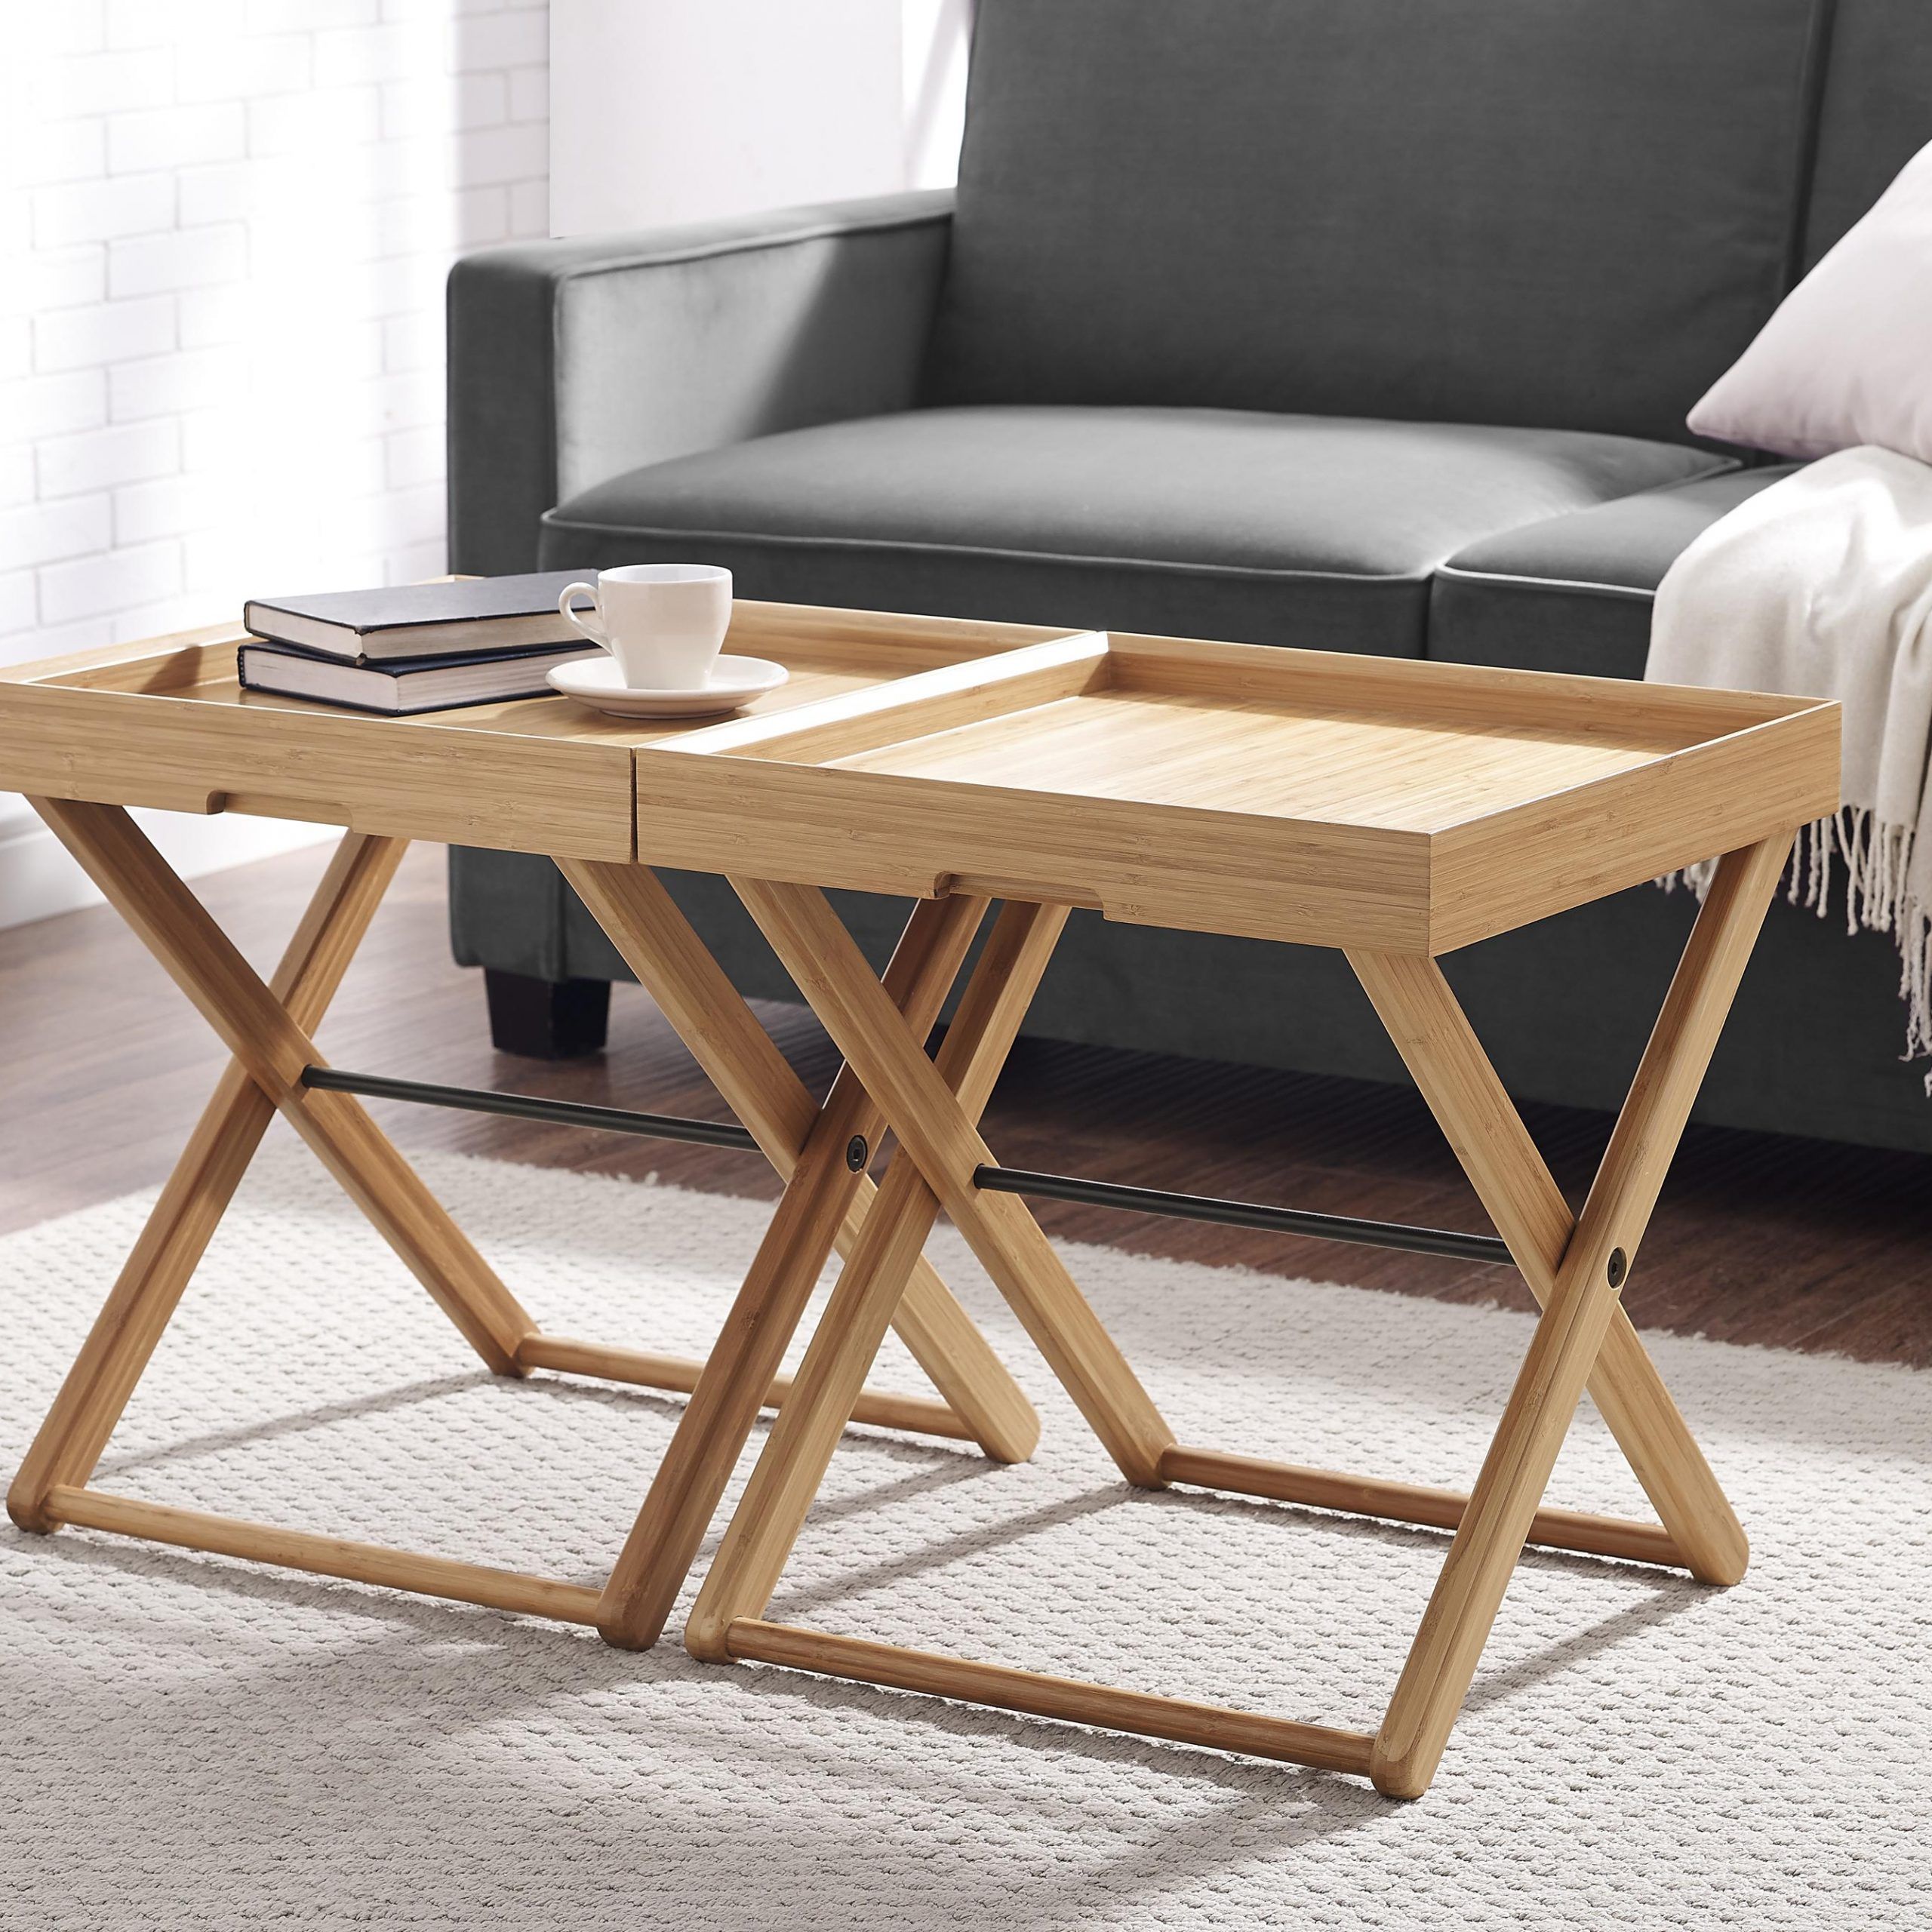 Bamboo Tray Table Caramelized Modern Telinegreenington (gt001ca) Pertaining To Caramalized Coffee Tables (View 11 of 15)